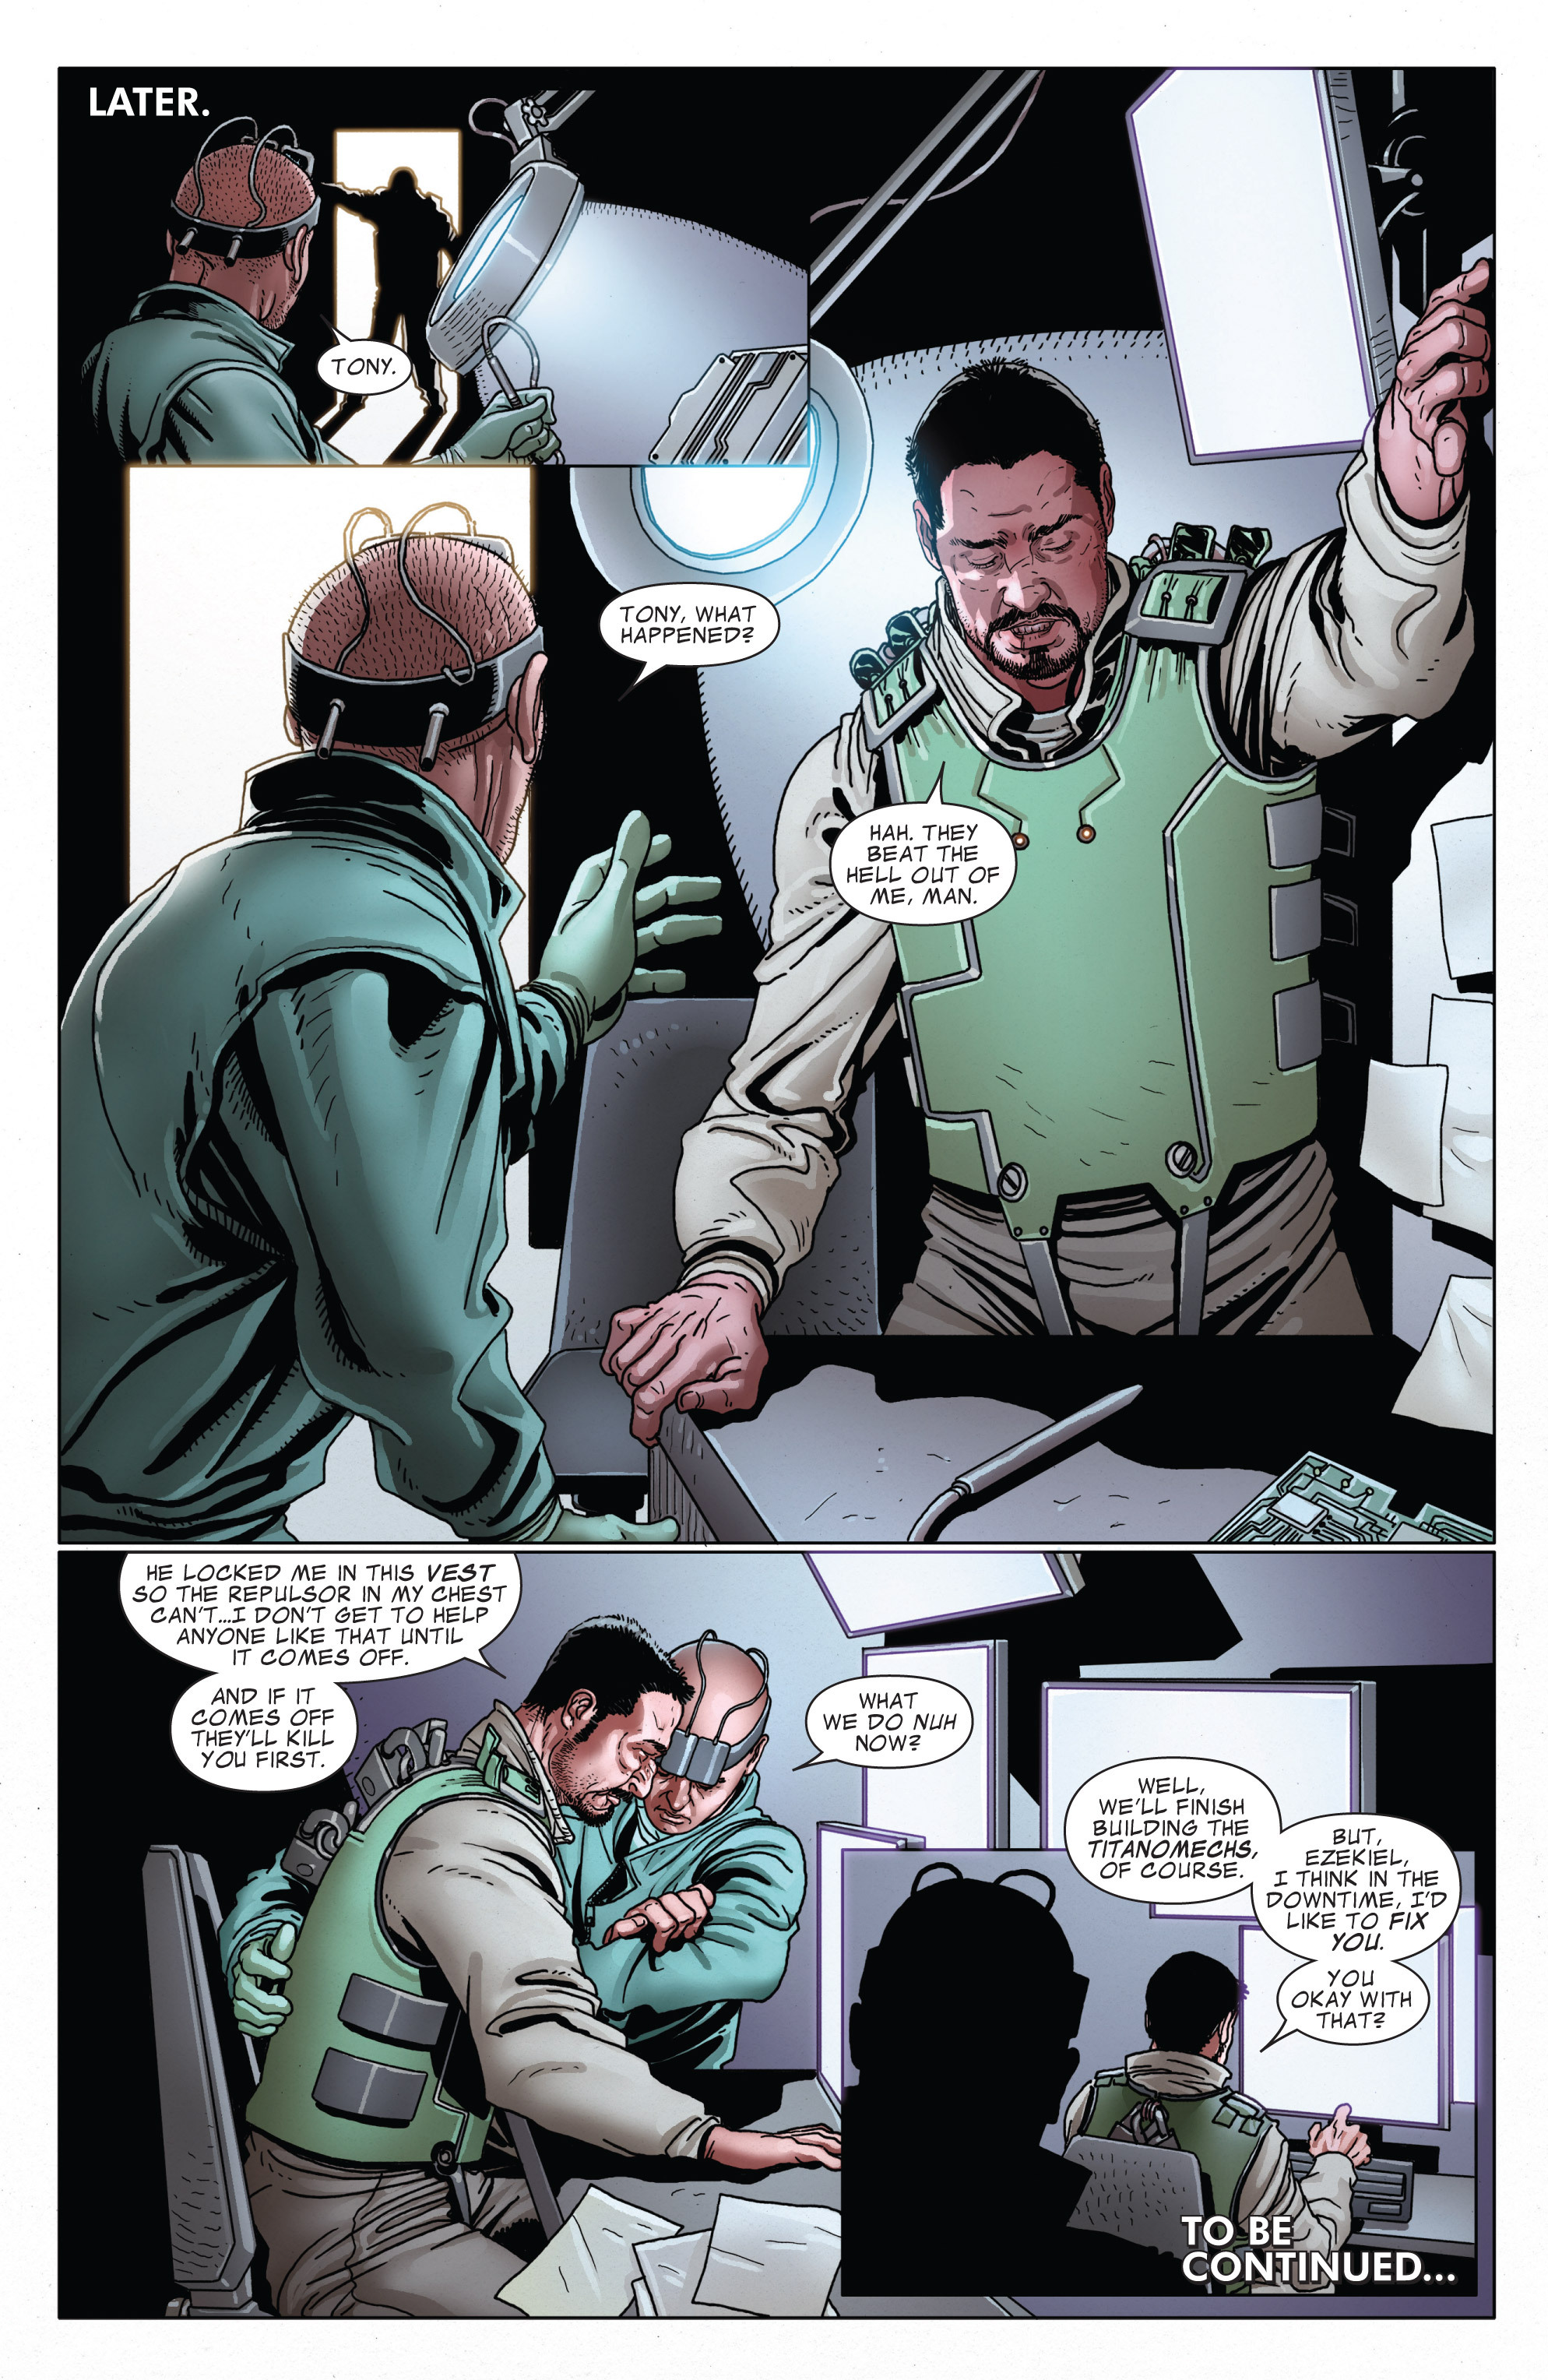 Invincible Iron Man (2008) 521 Page 21